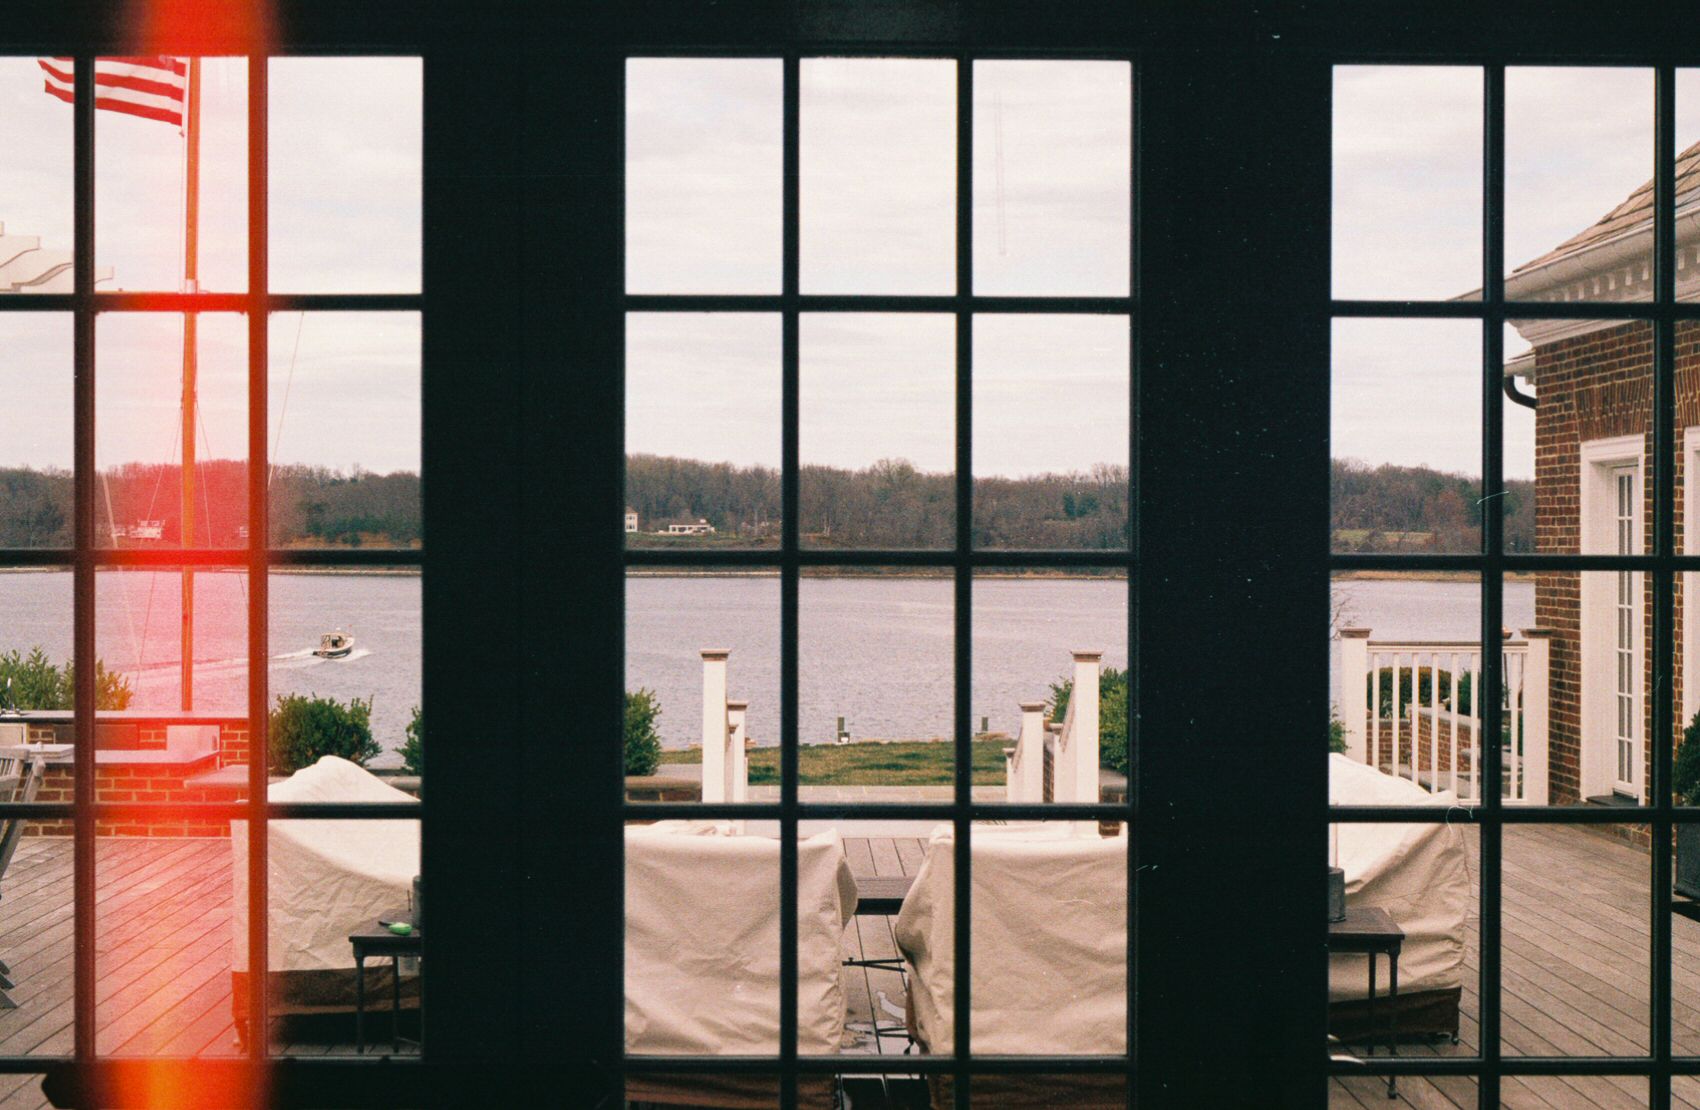 35mm film photograph of Severn River, seen through the window of a riverside home in Annapolis, Maryland